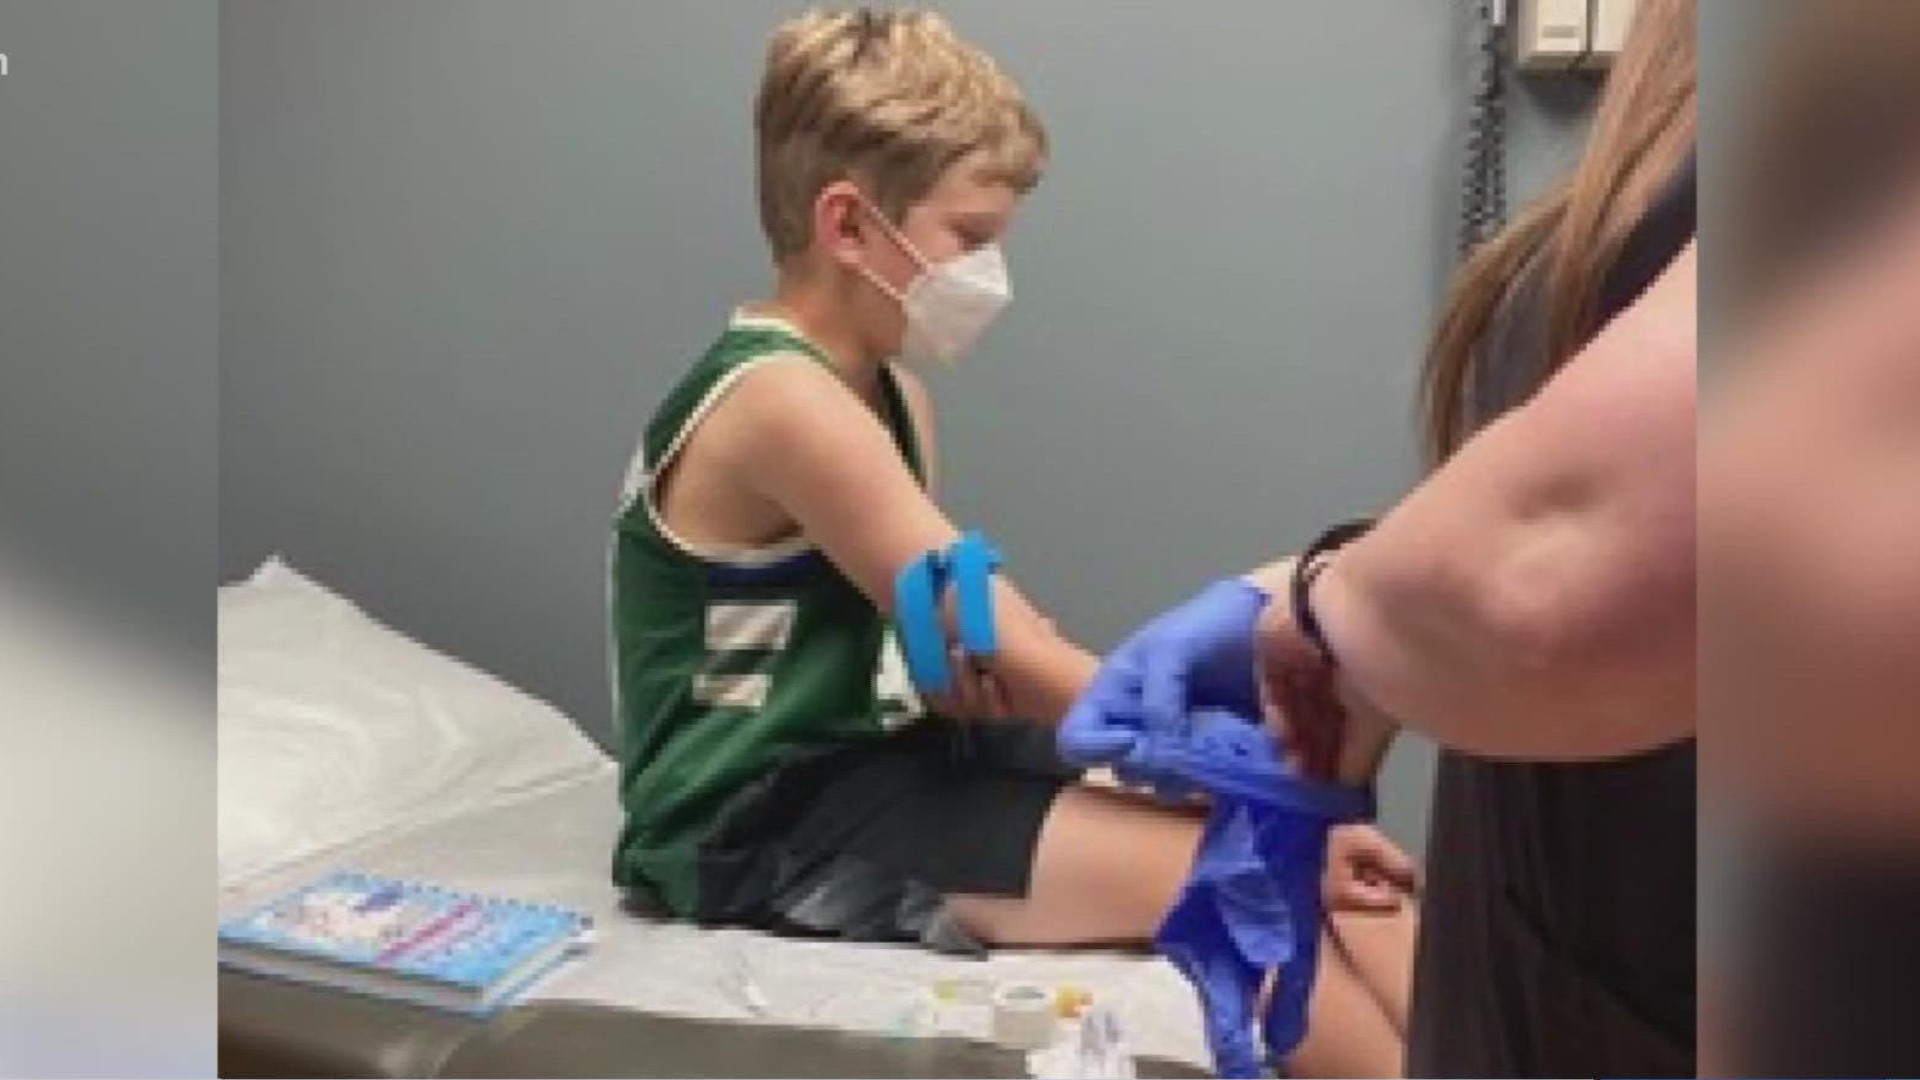 9-year-old Nolan Roberts and his mother Mindy are encouraging other kids and families to do their research and get the vaccine when possible.